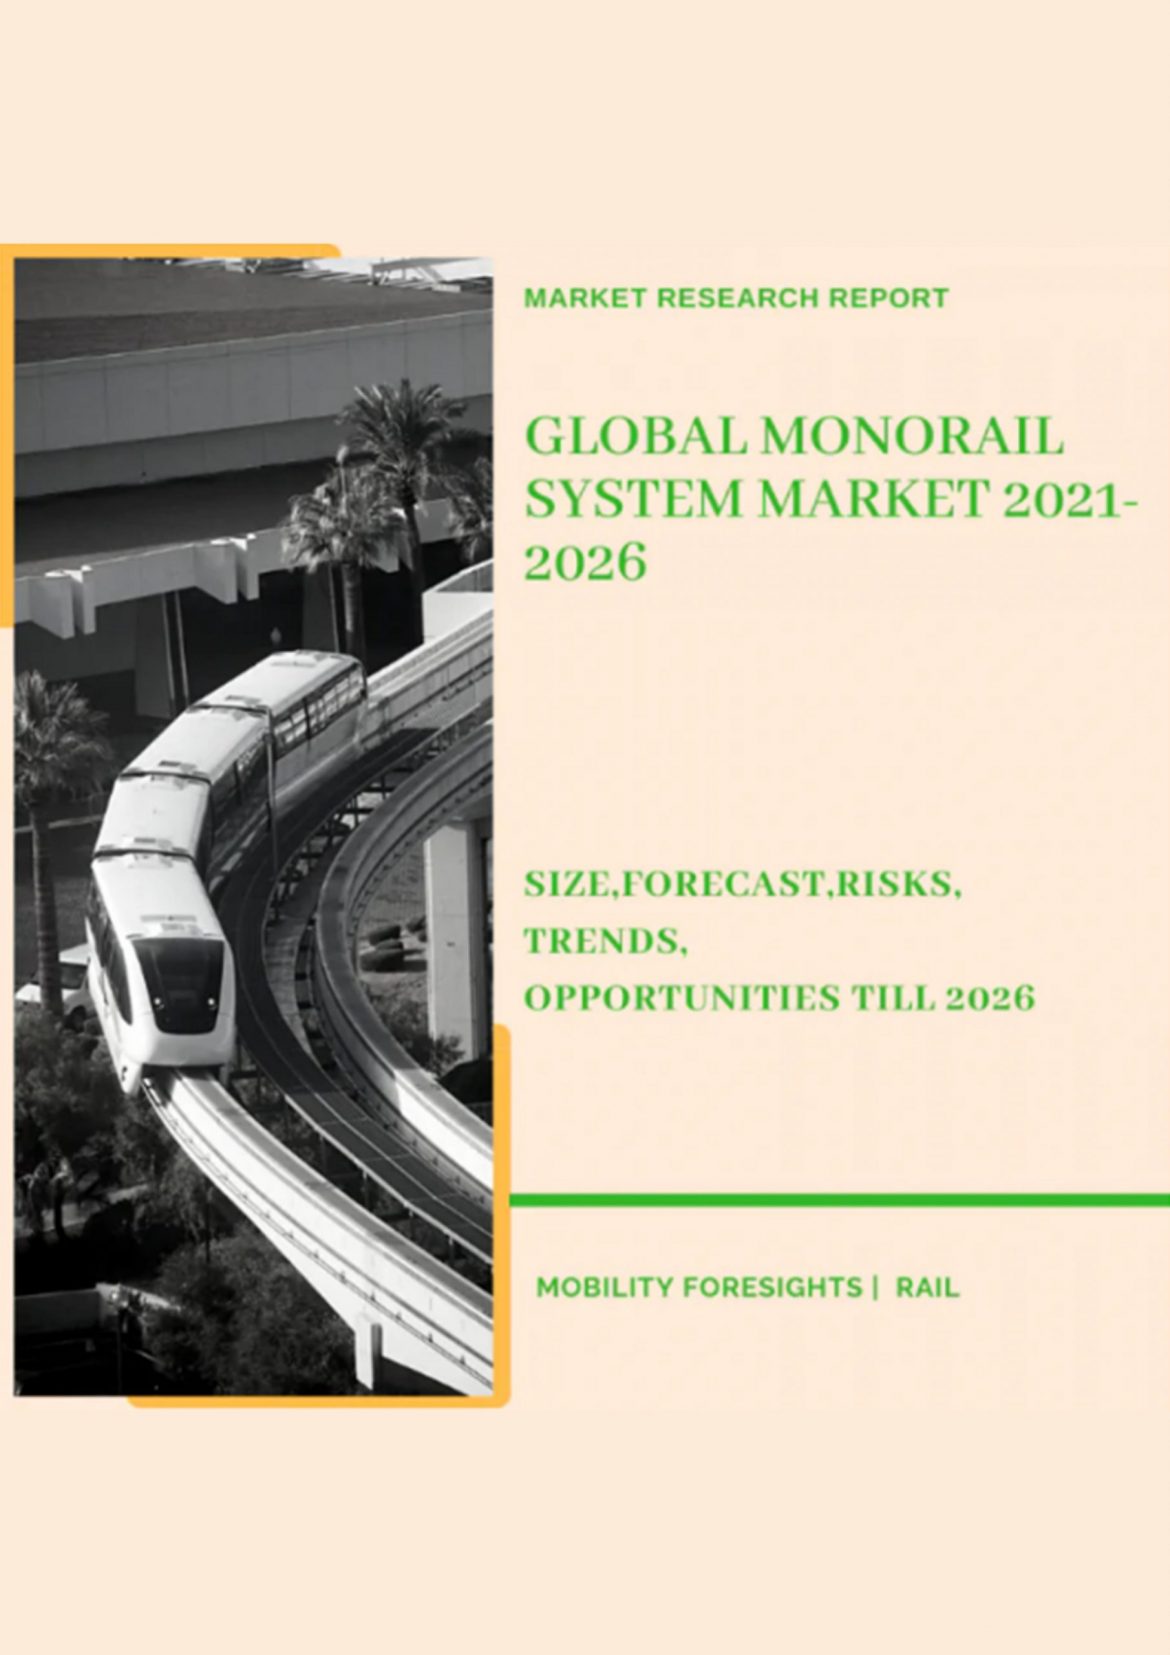 Global Monorail System Market 2021-2026